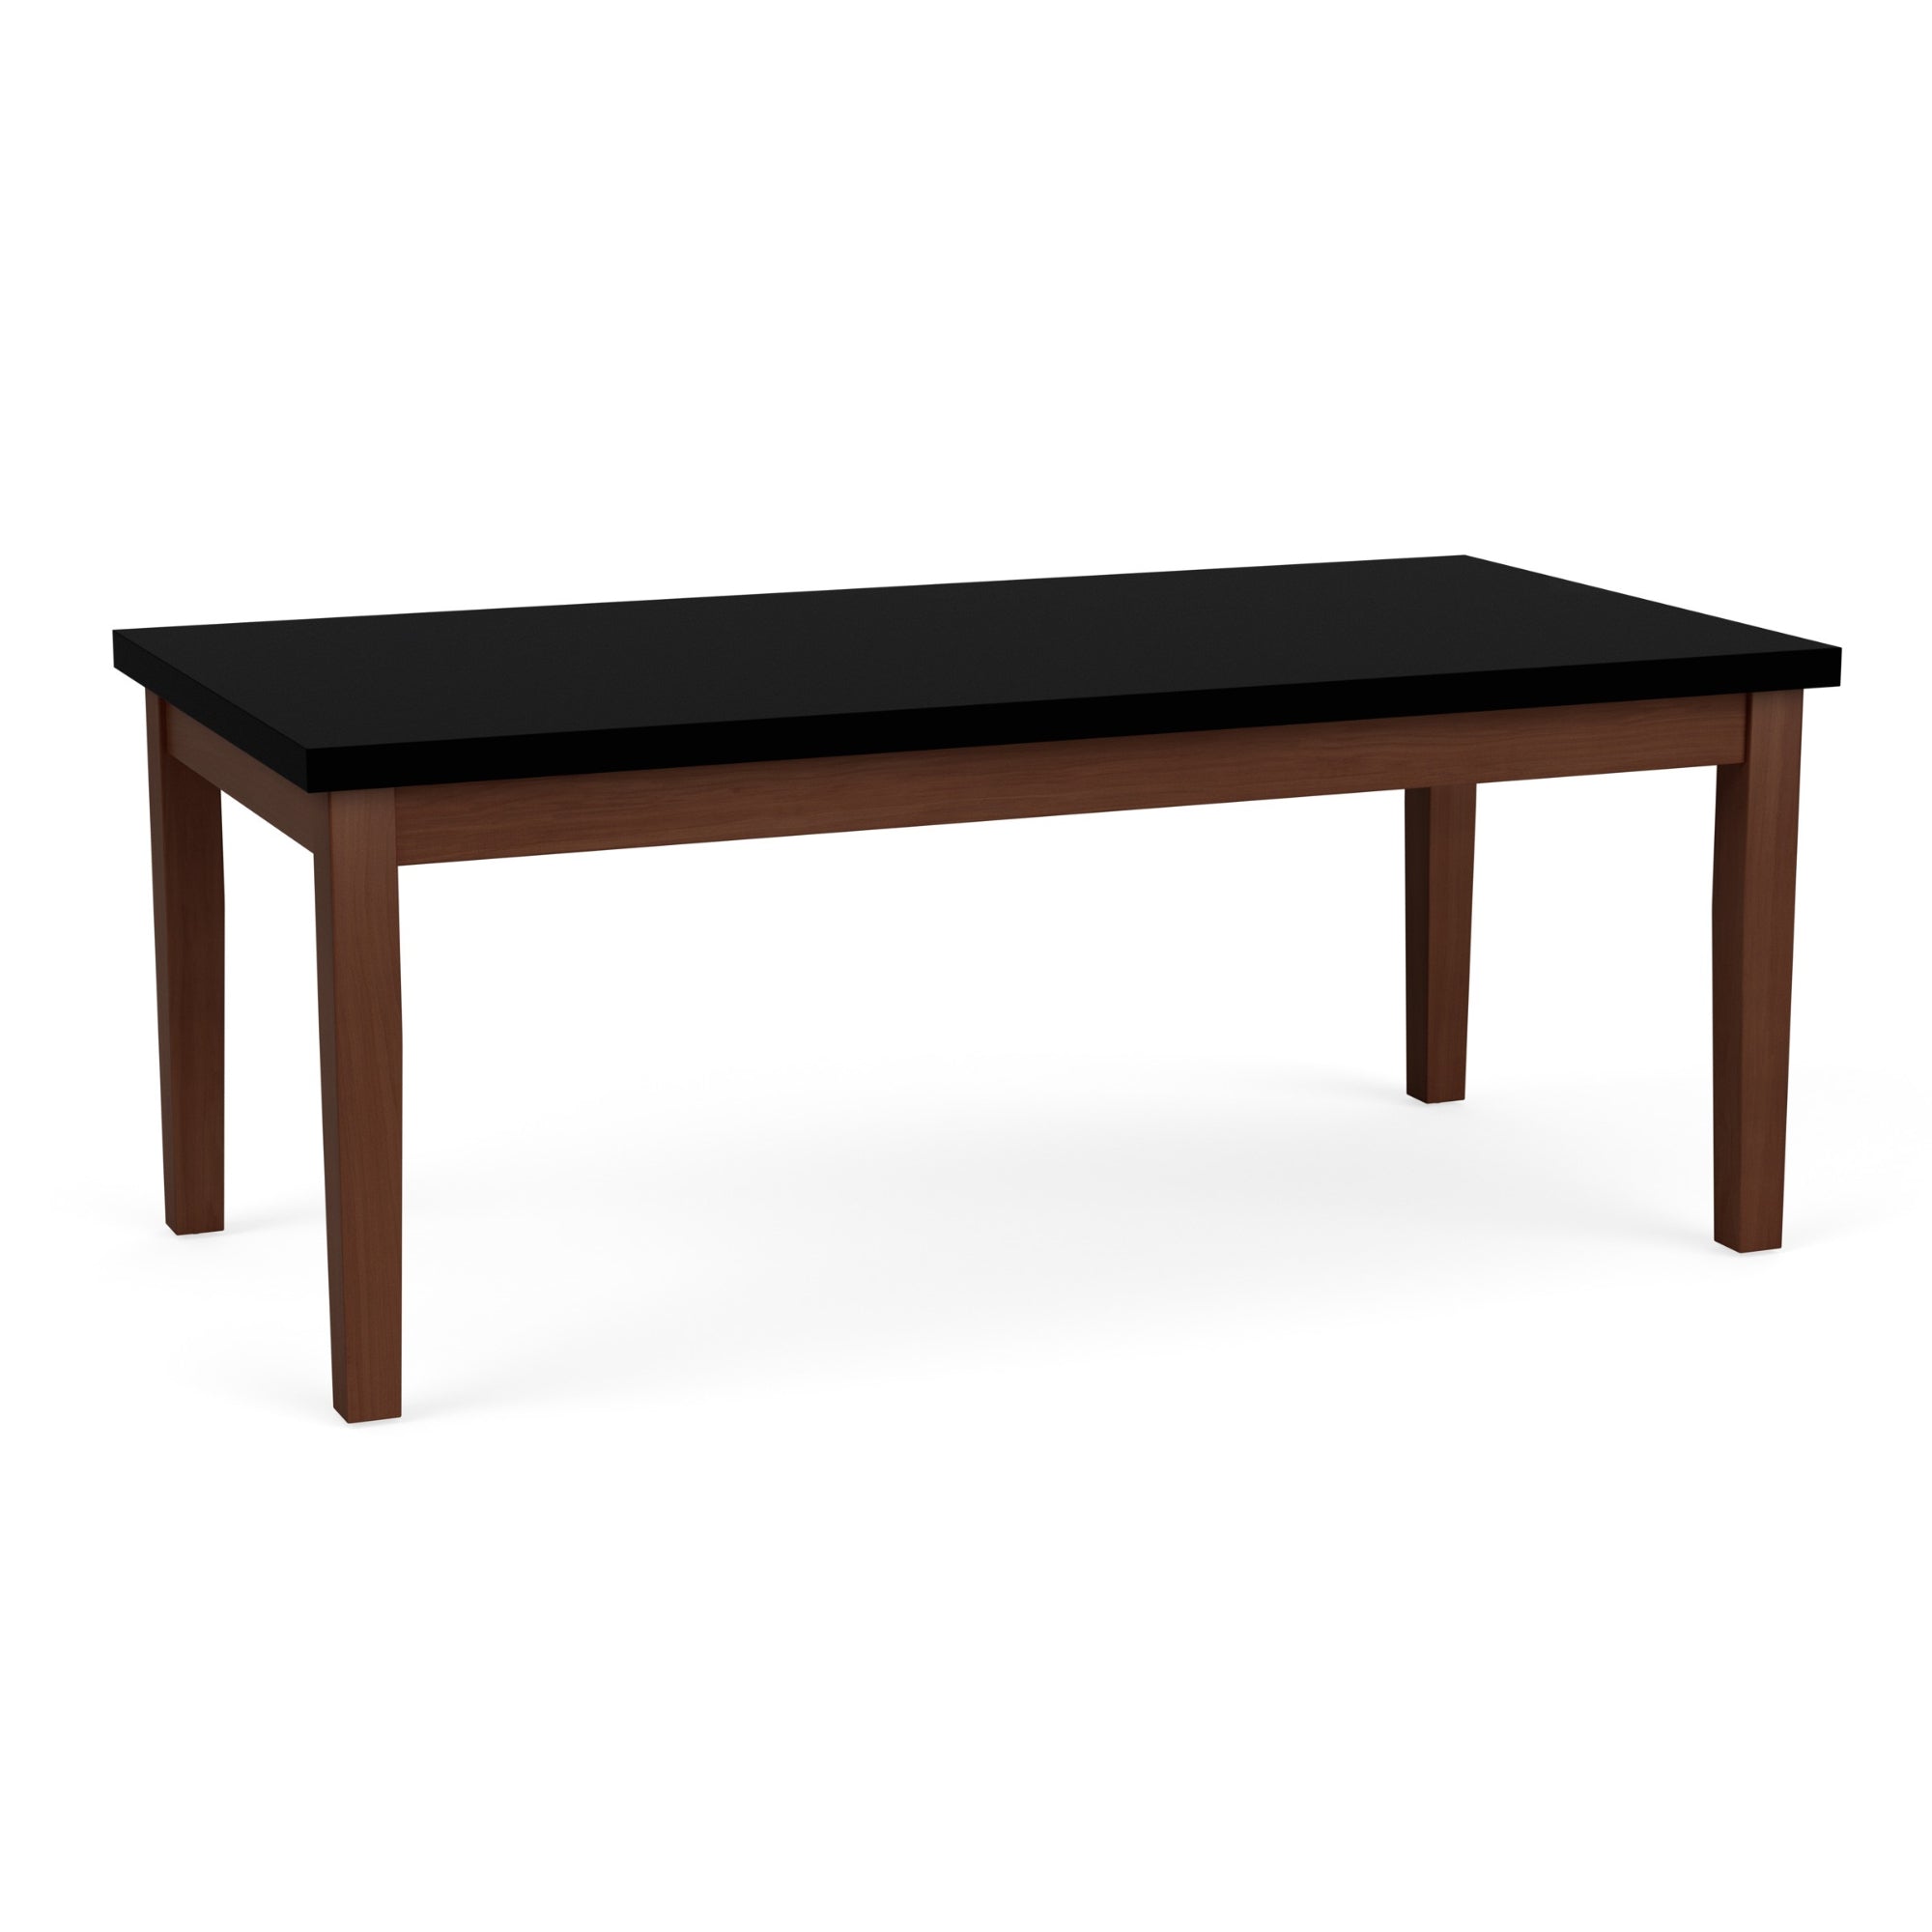 Lenox Wood Collection Coffee Table, Black Laminate Tabletop, FREE SHIPPING